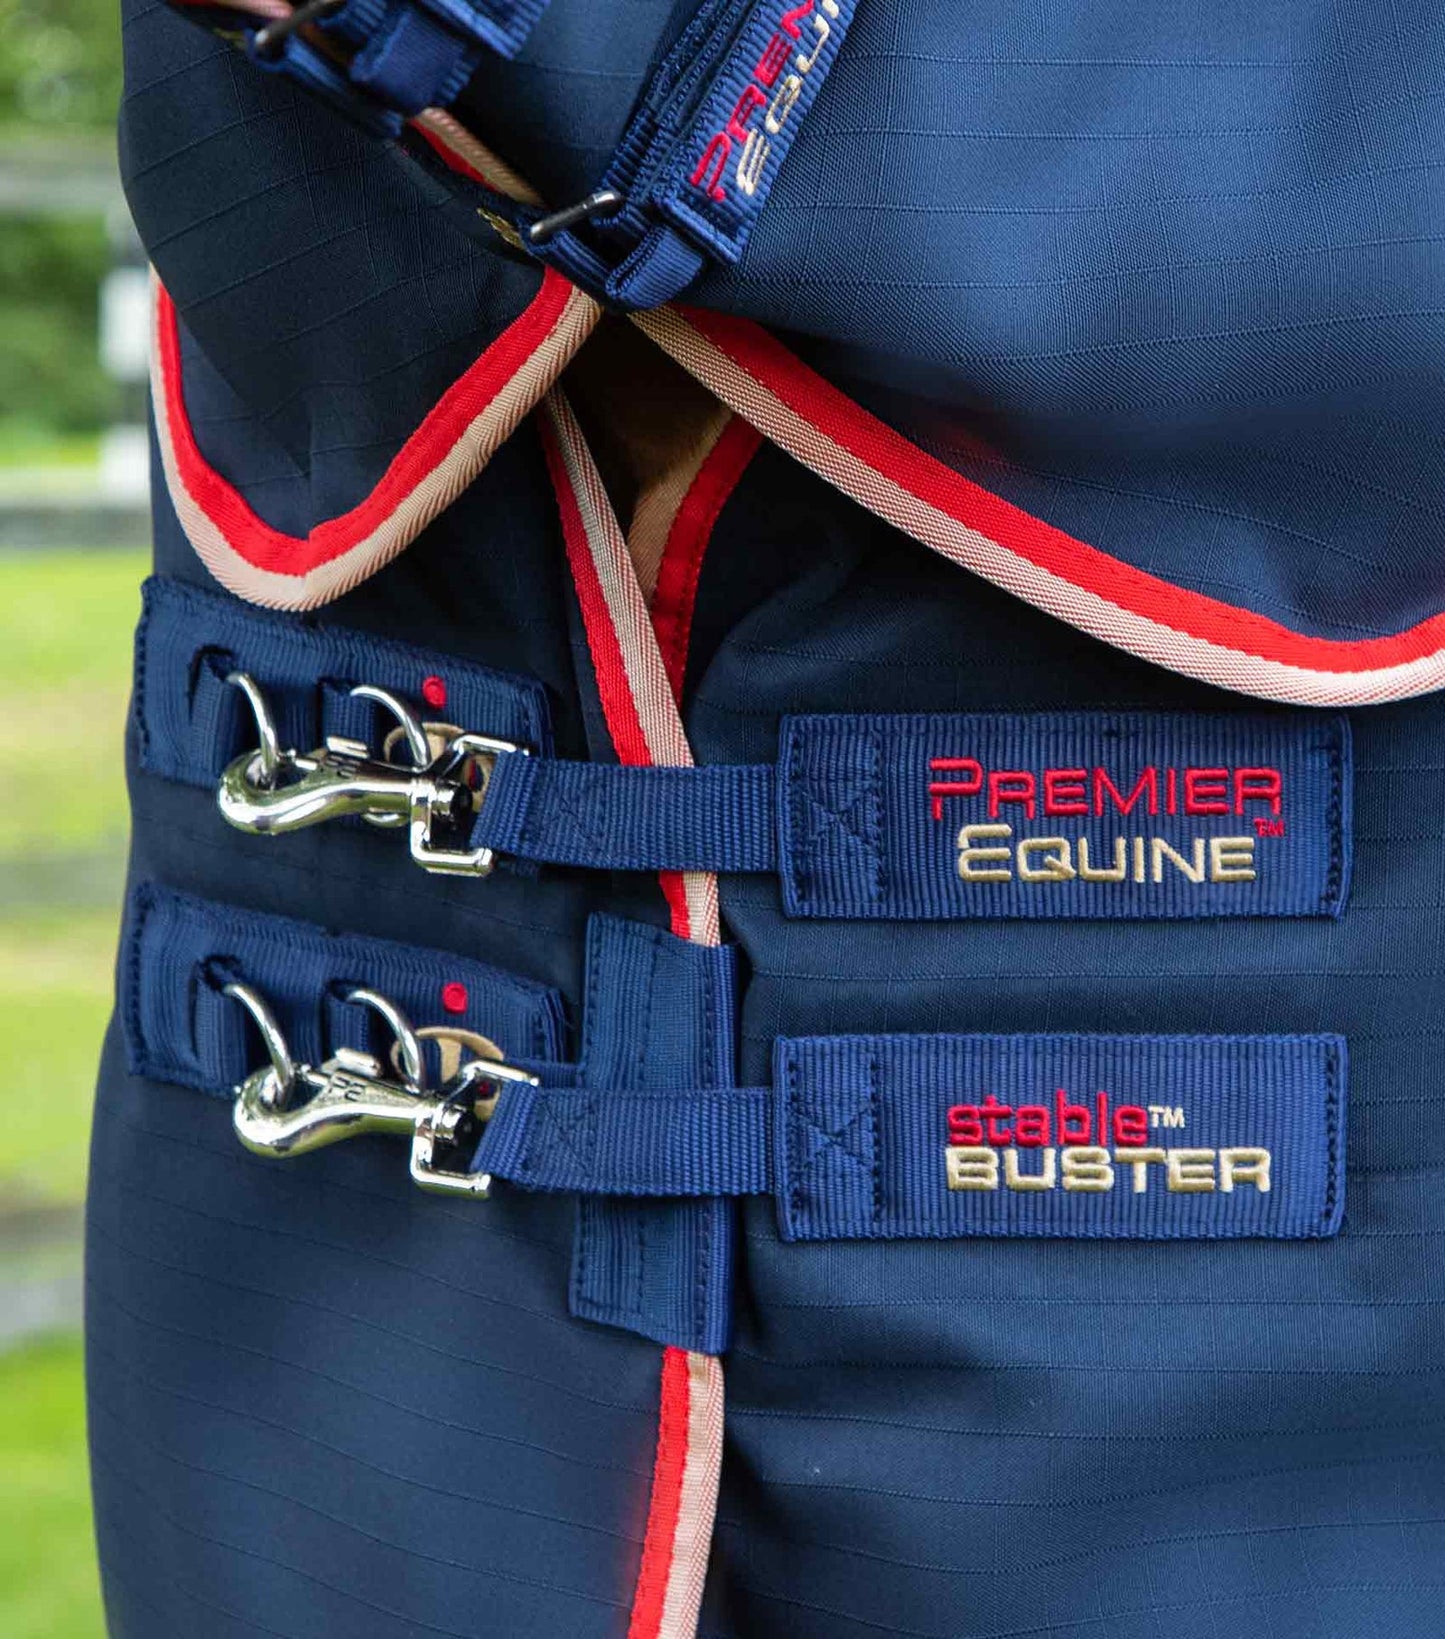 Premier Equine Stable Buster Lite 100g Stable Rug with Neck Cover